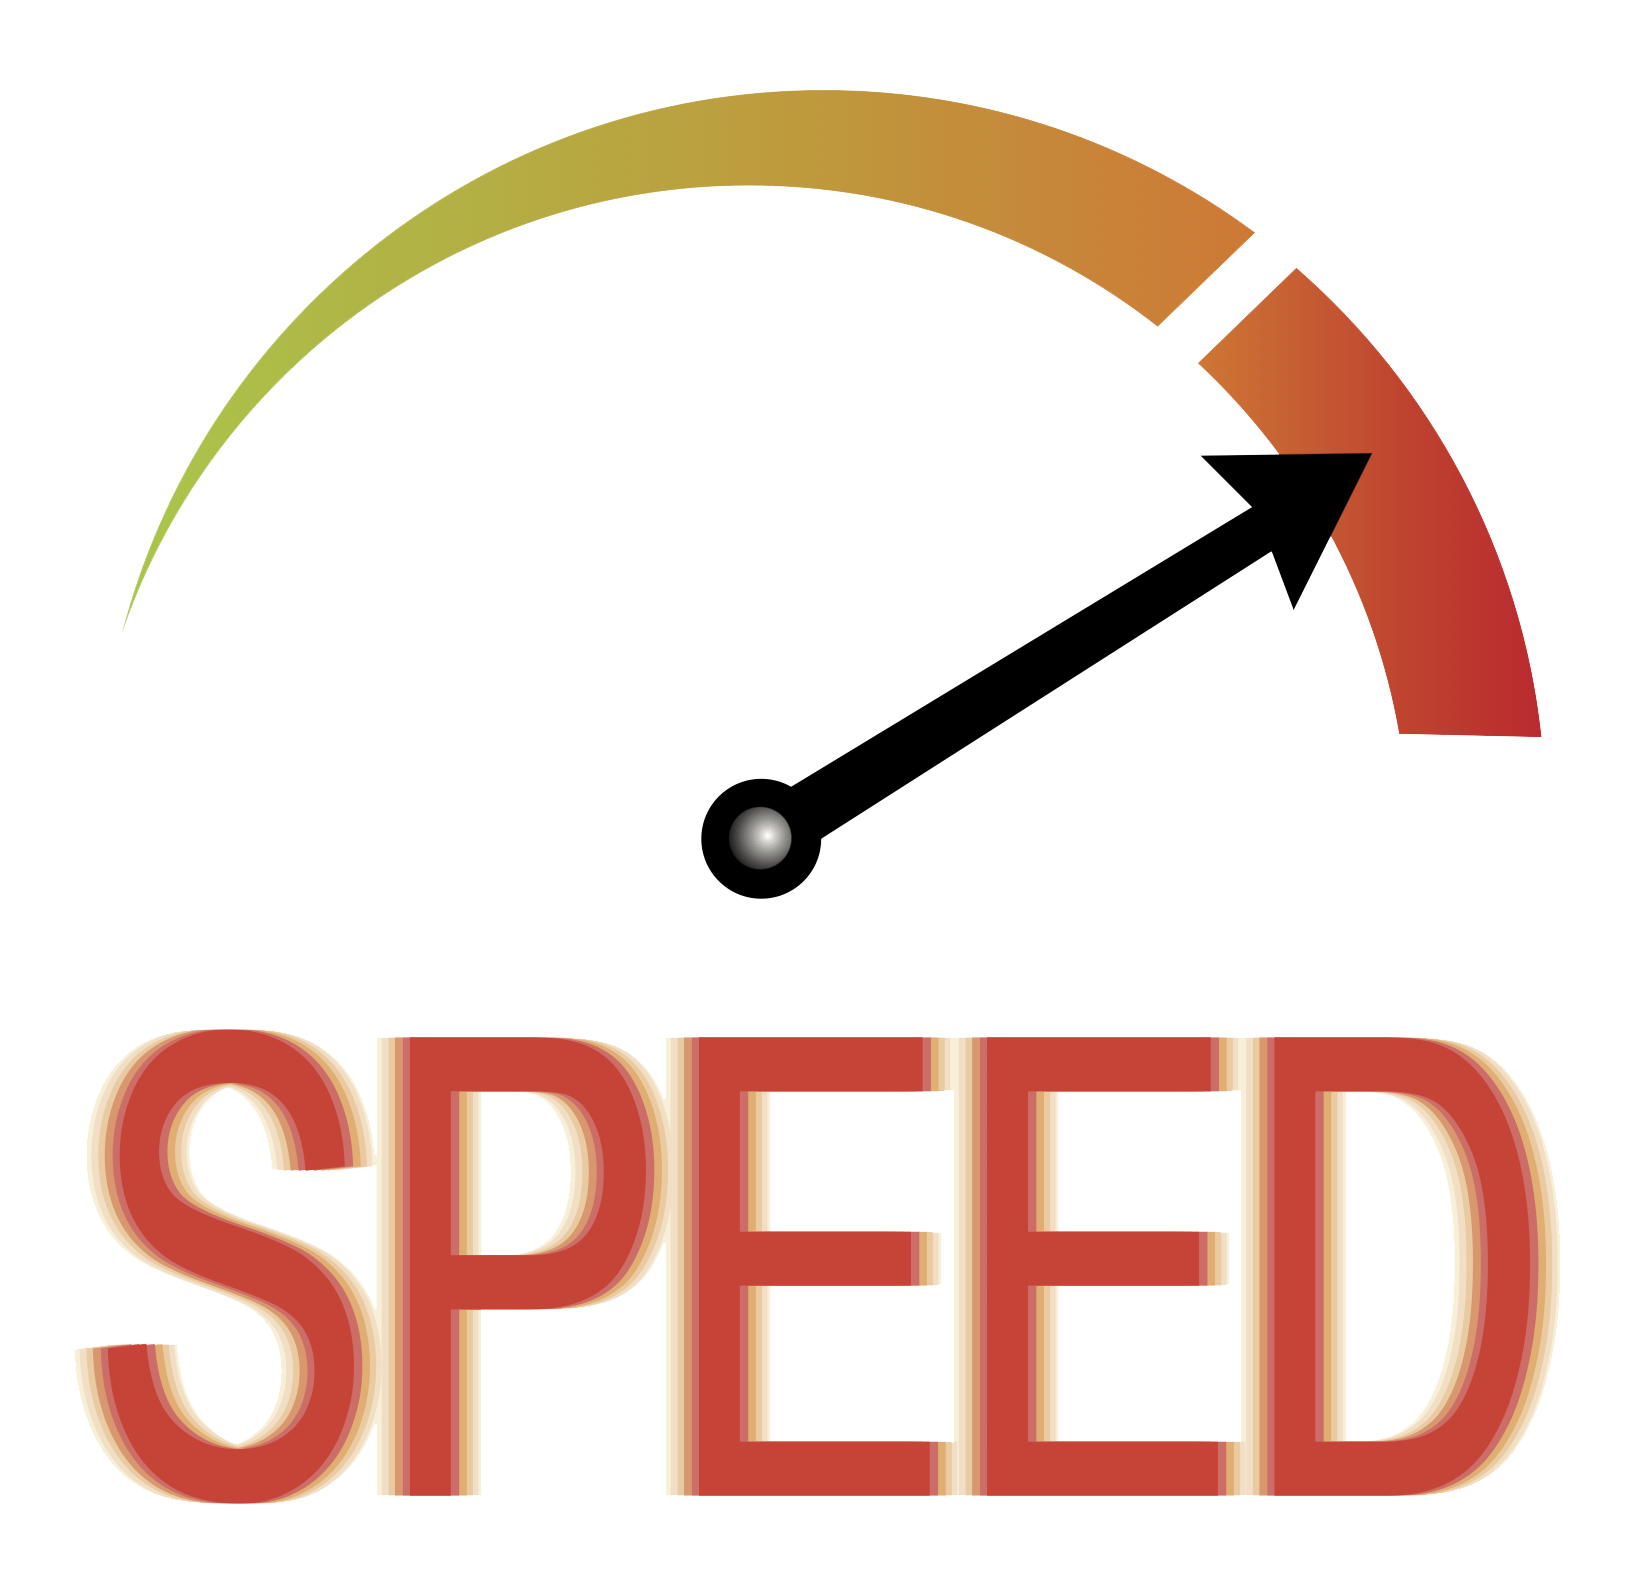 fast clipart high speed